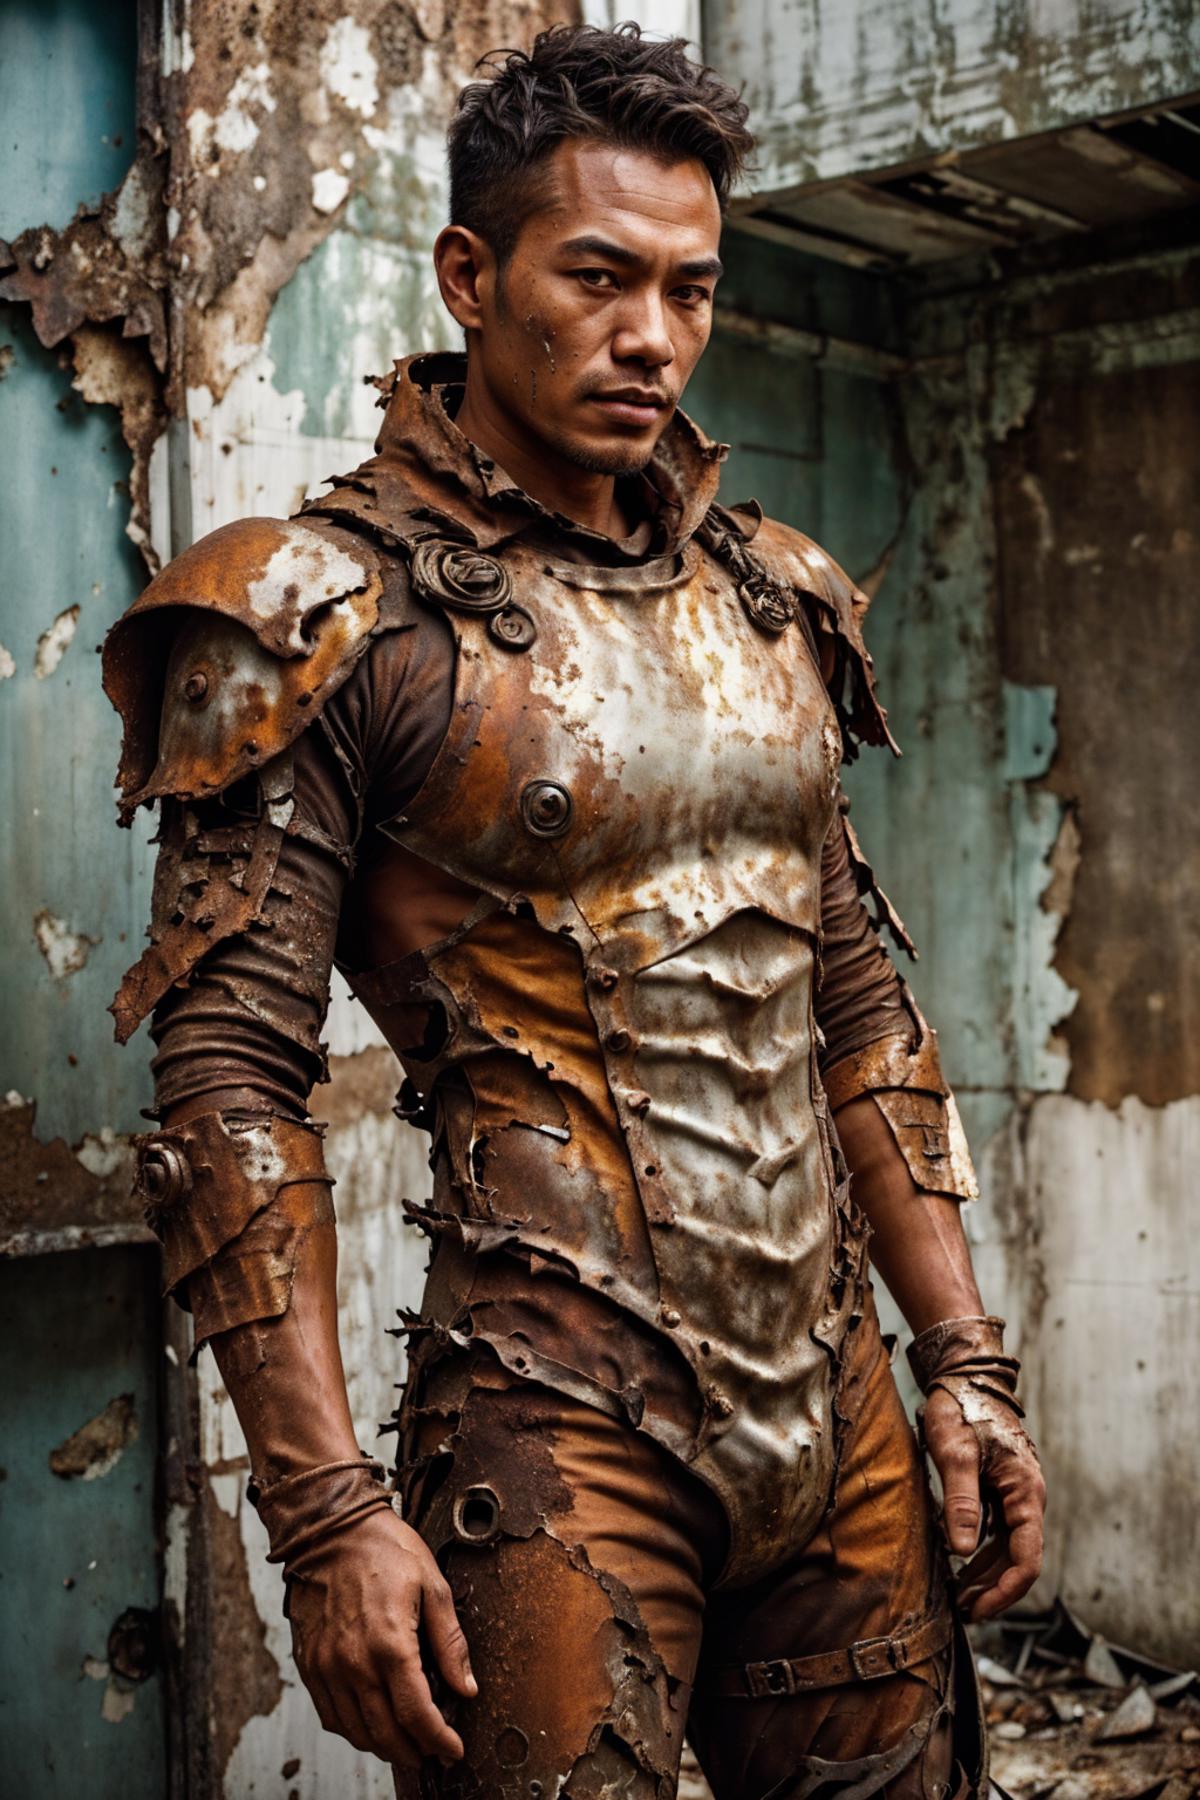 Rusty Armor image by Kairen92